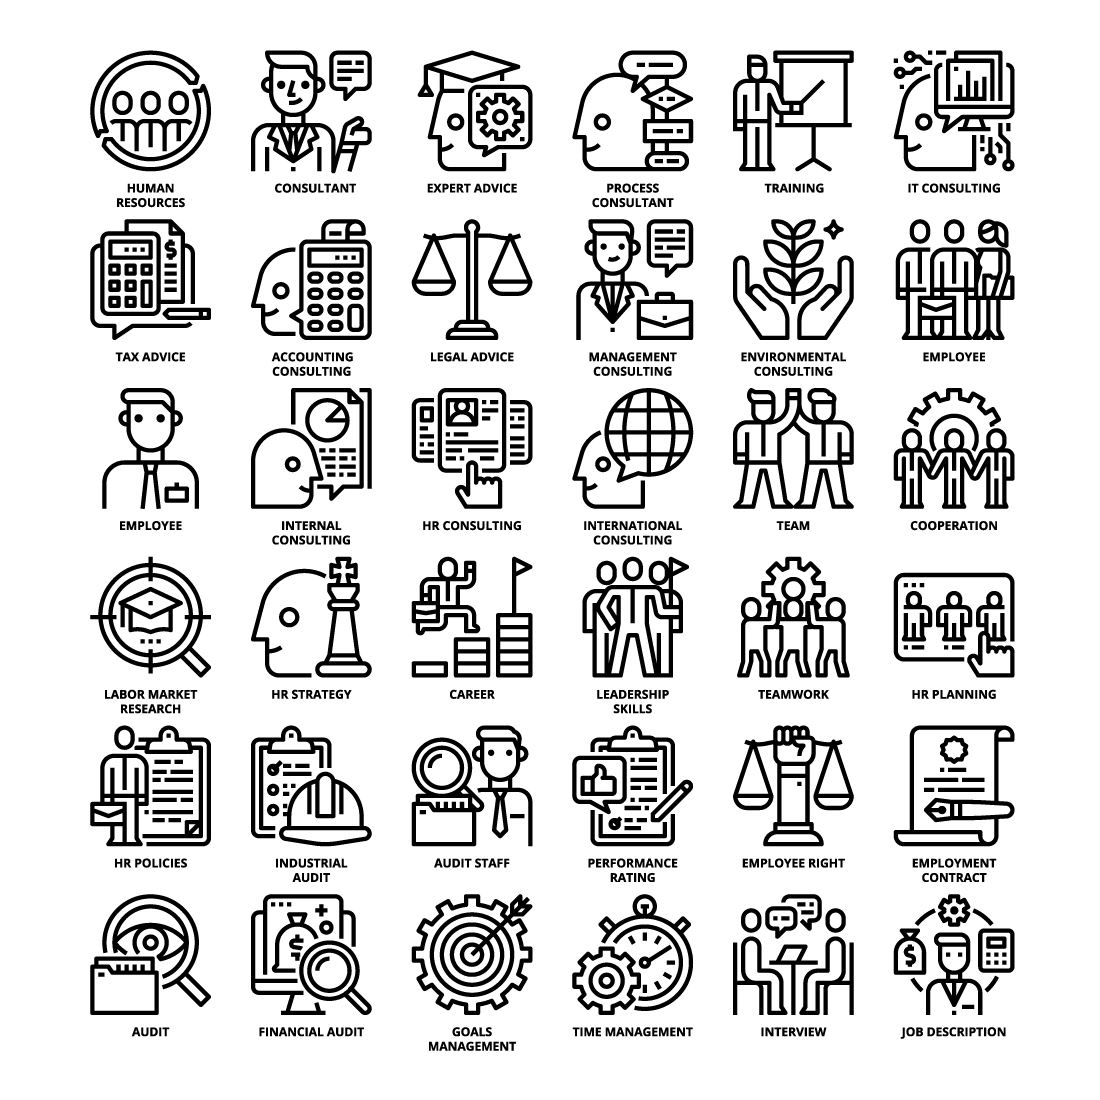 36 Human Resources Icons Set x 4 Styles preview image.